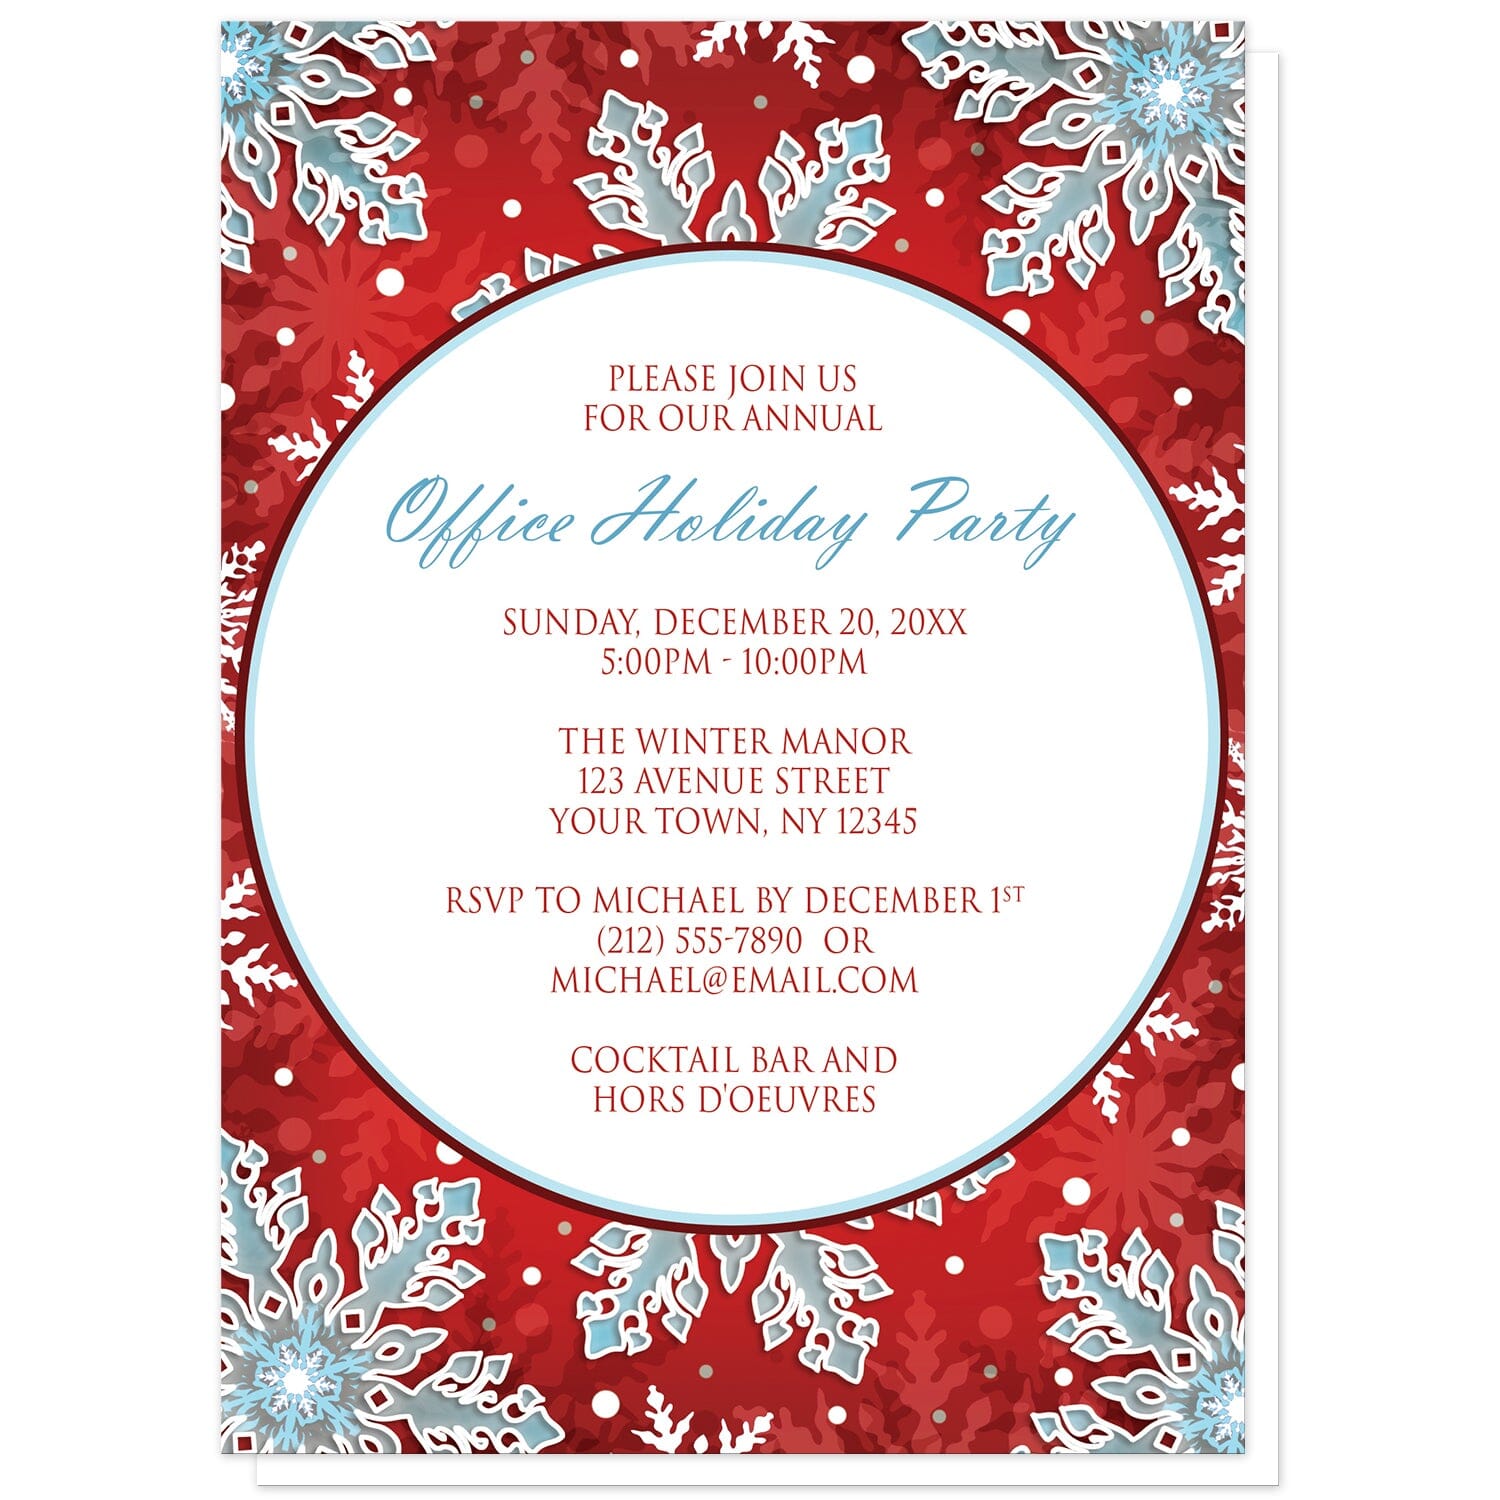 Modern Red White Blue Snowflake Holiday Party Invitations at Artistically Invited. Modern red white blue snowflake holiday party invitations with your personalized office holiday party or family holiday party details custom printed in blue and purple in a white circle over a royal red background covered in ornate white and blue snowflakes.